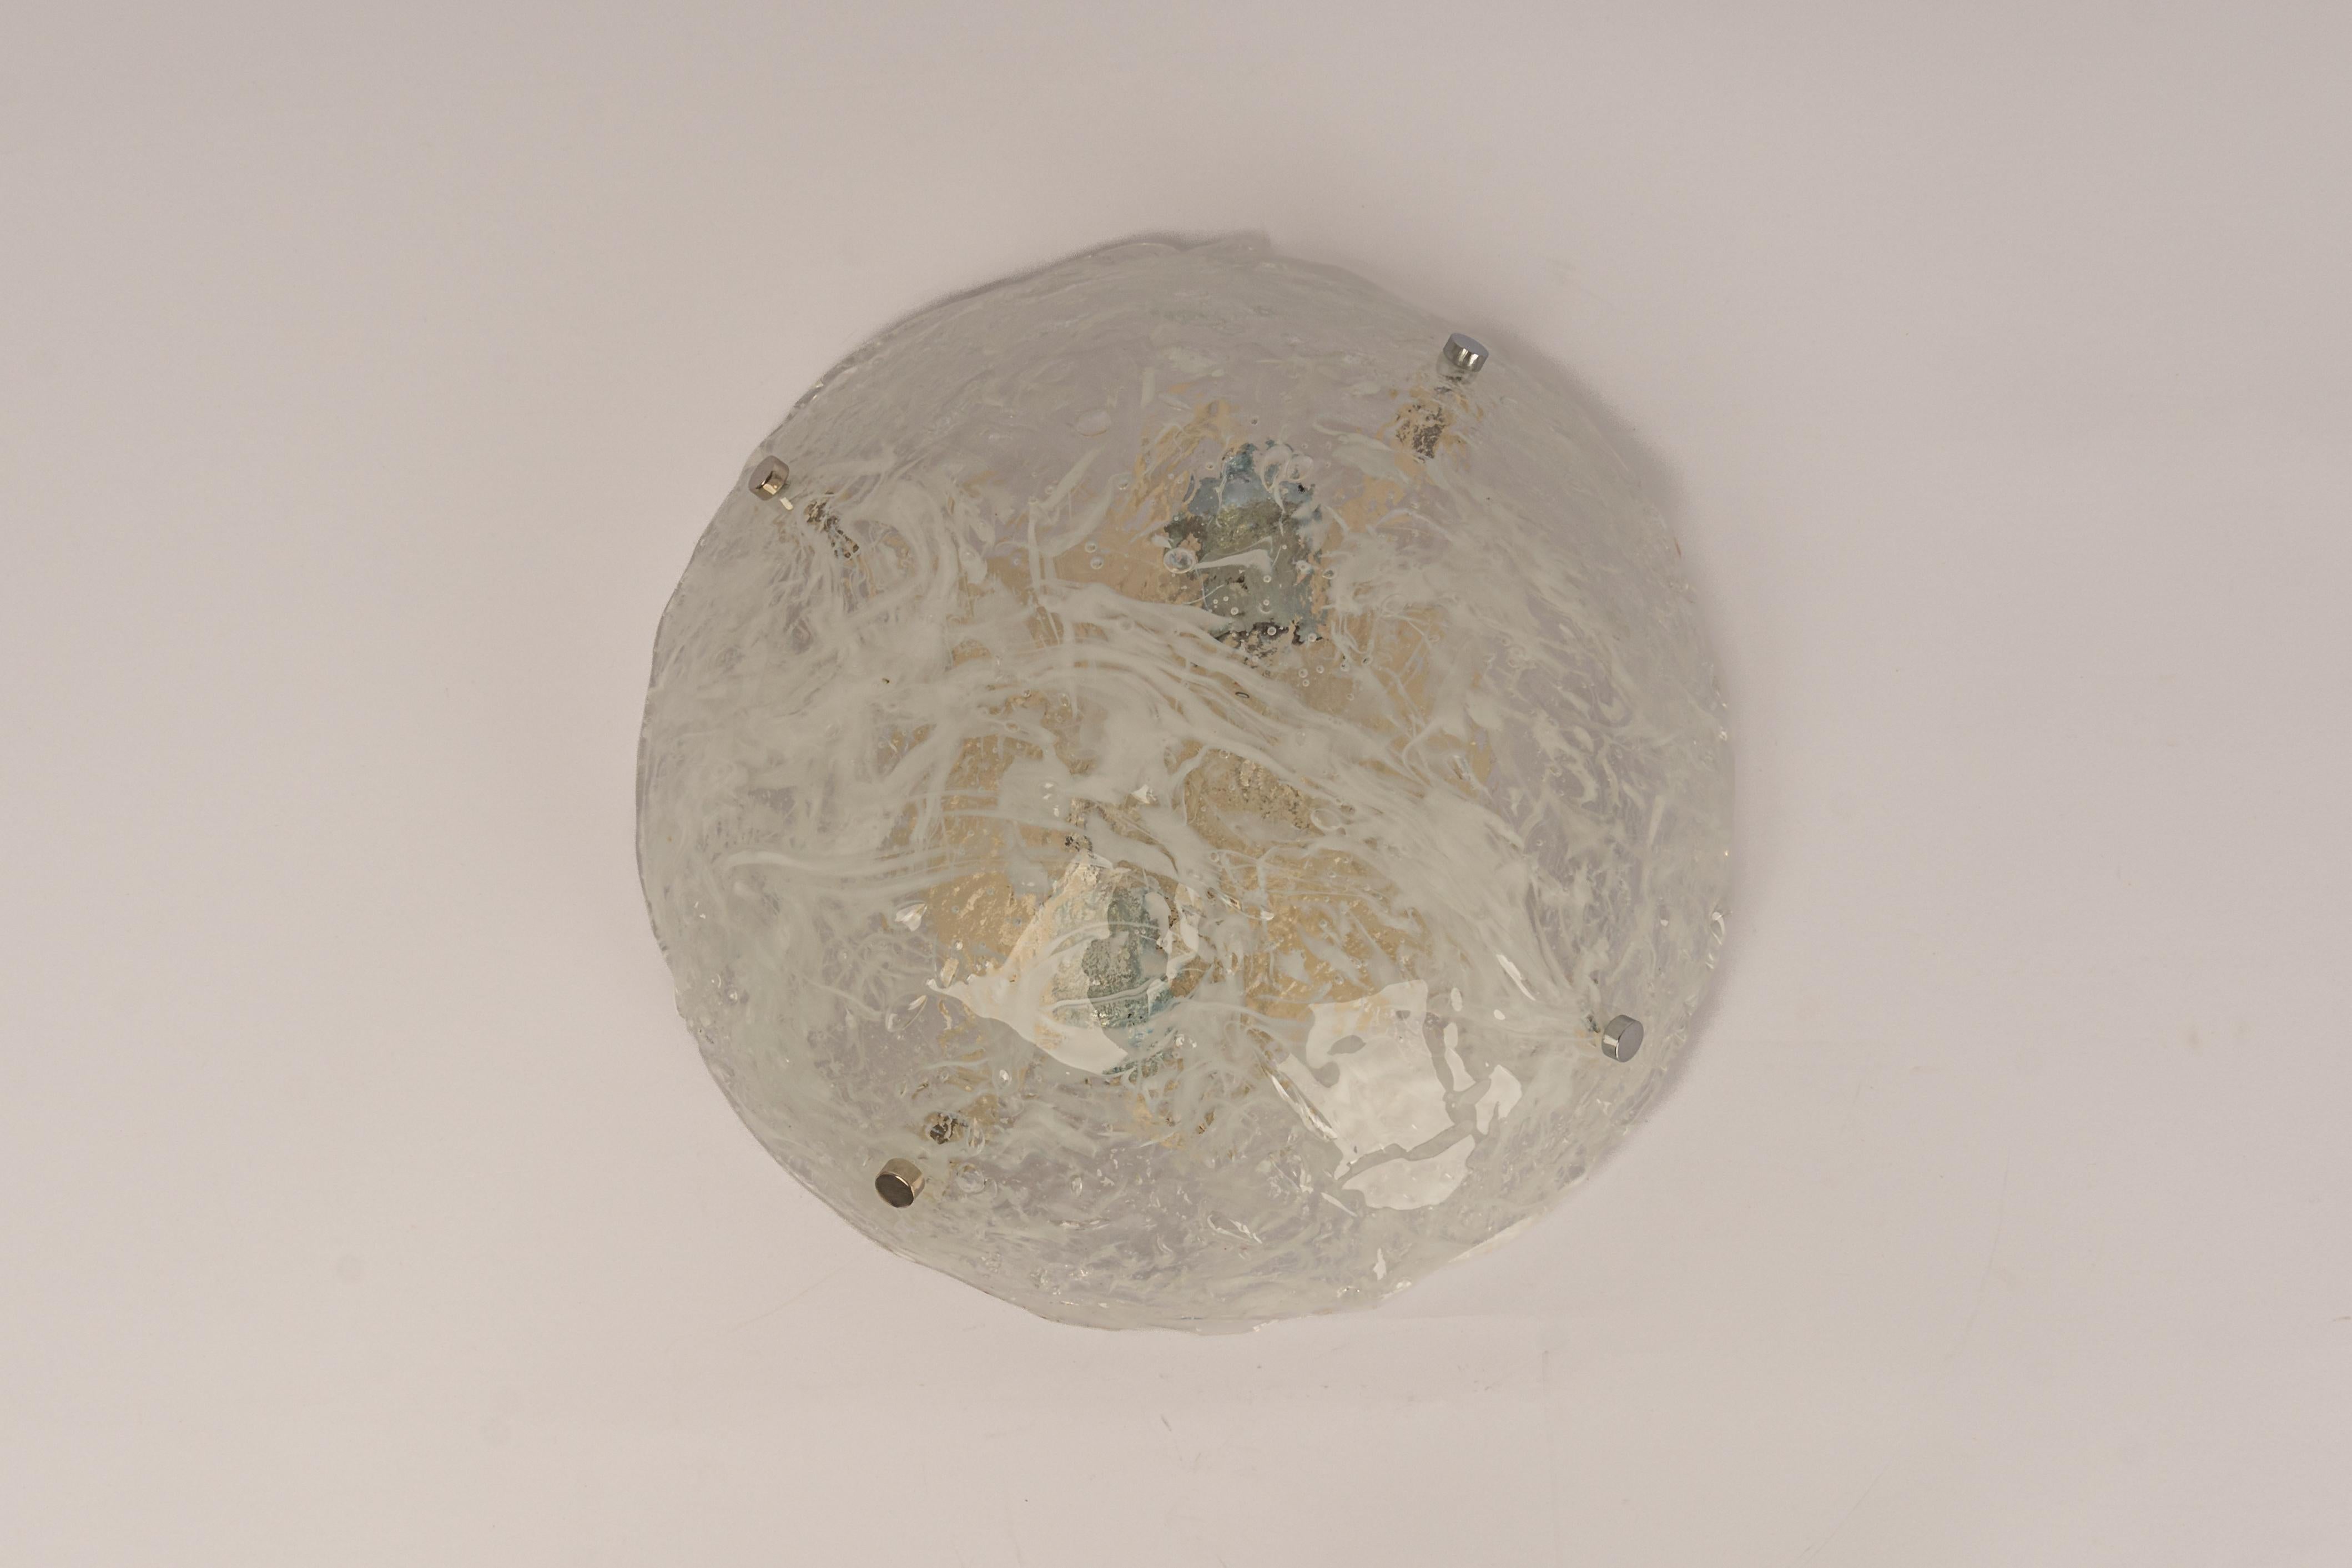 1 of 2 Large Venini Ceiling Lights Attributed to Carlo Scarpa for Venini, 1950s For Sale 5